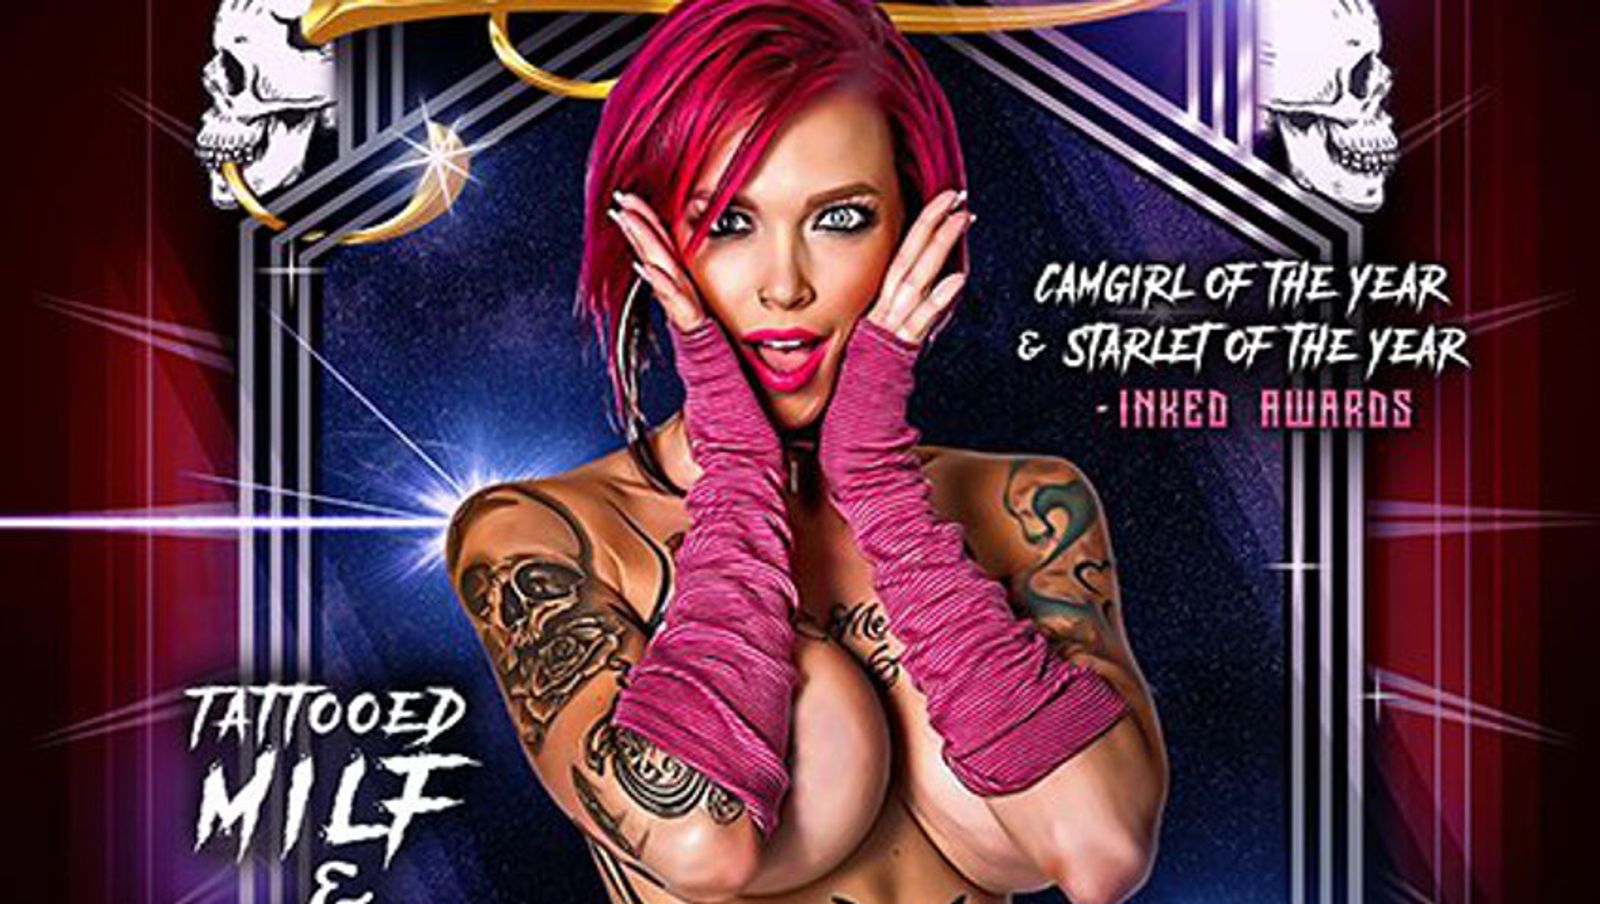 Anna Bell Peaks to Feature in North Carolina This Week